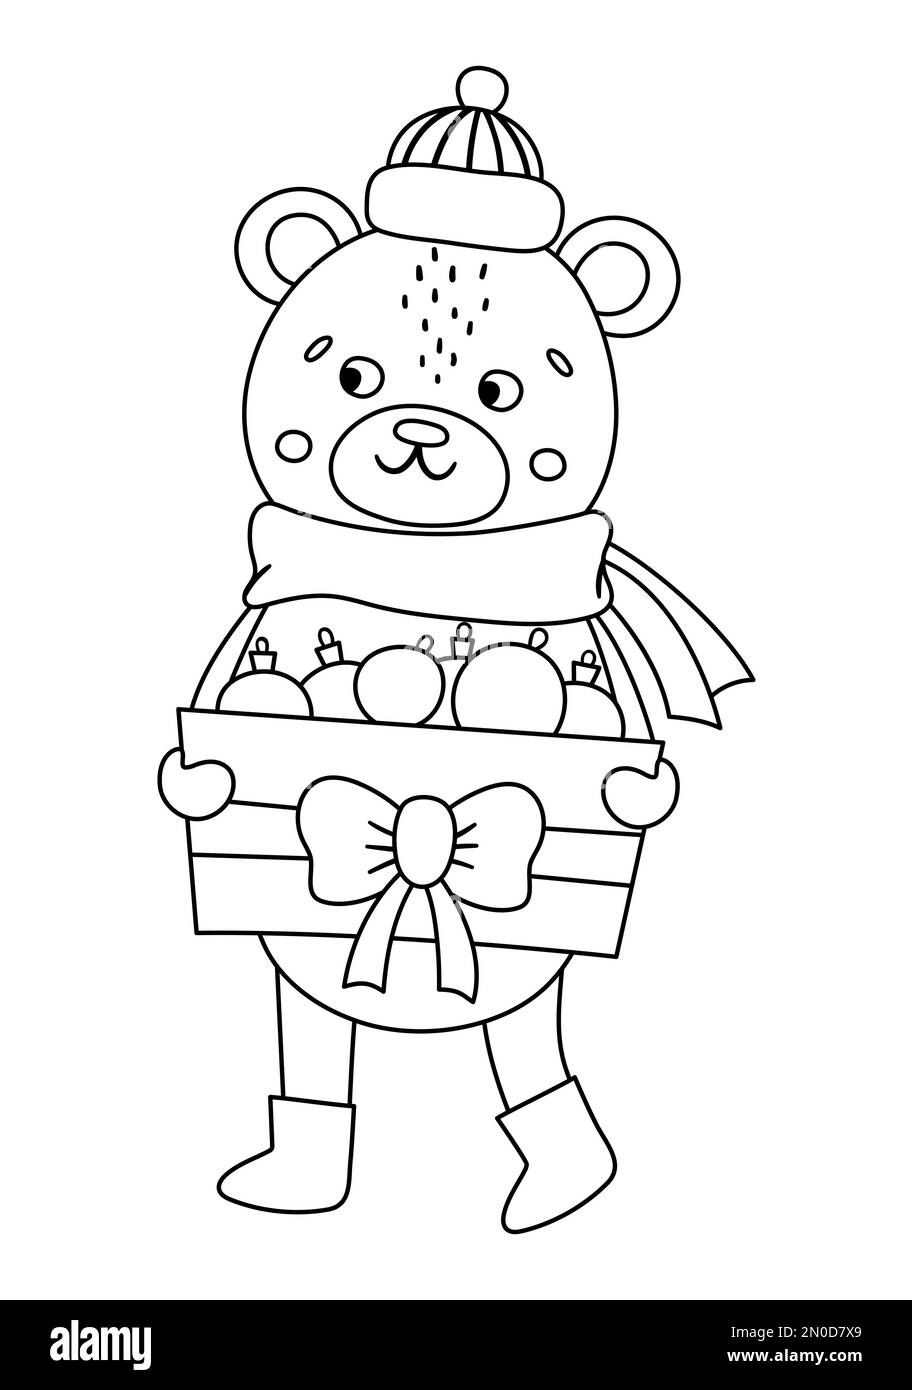 Vector black and white bear in hat and scarf with box of Christmas balls. Cute winter animal illustration with decorations for fir tree. Funny Christm Stock Vector